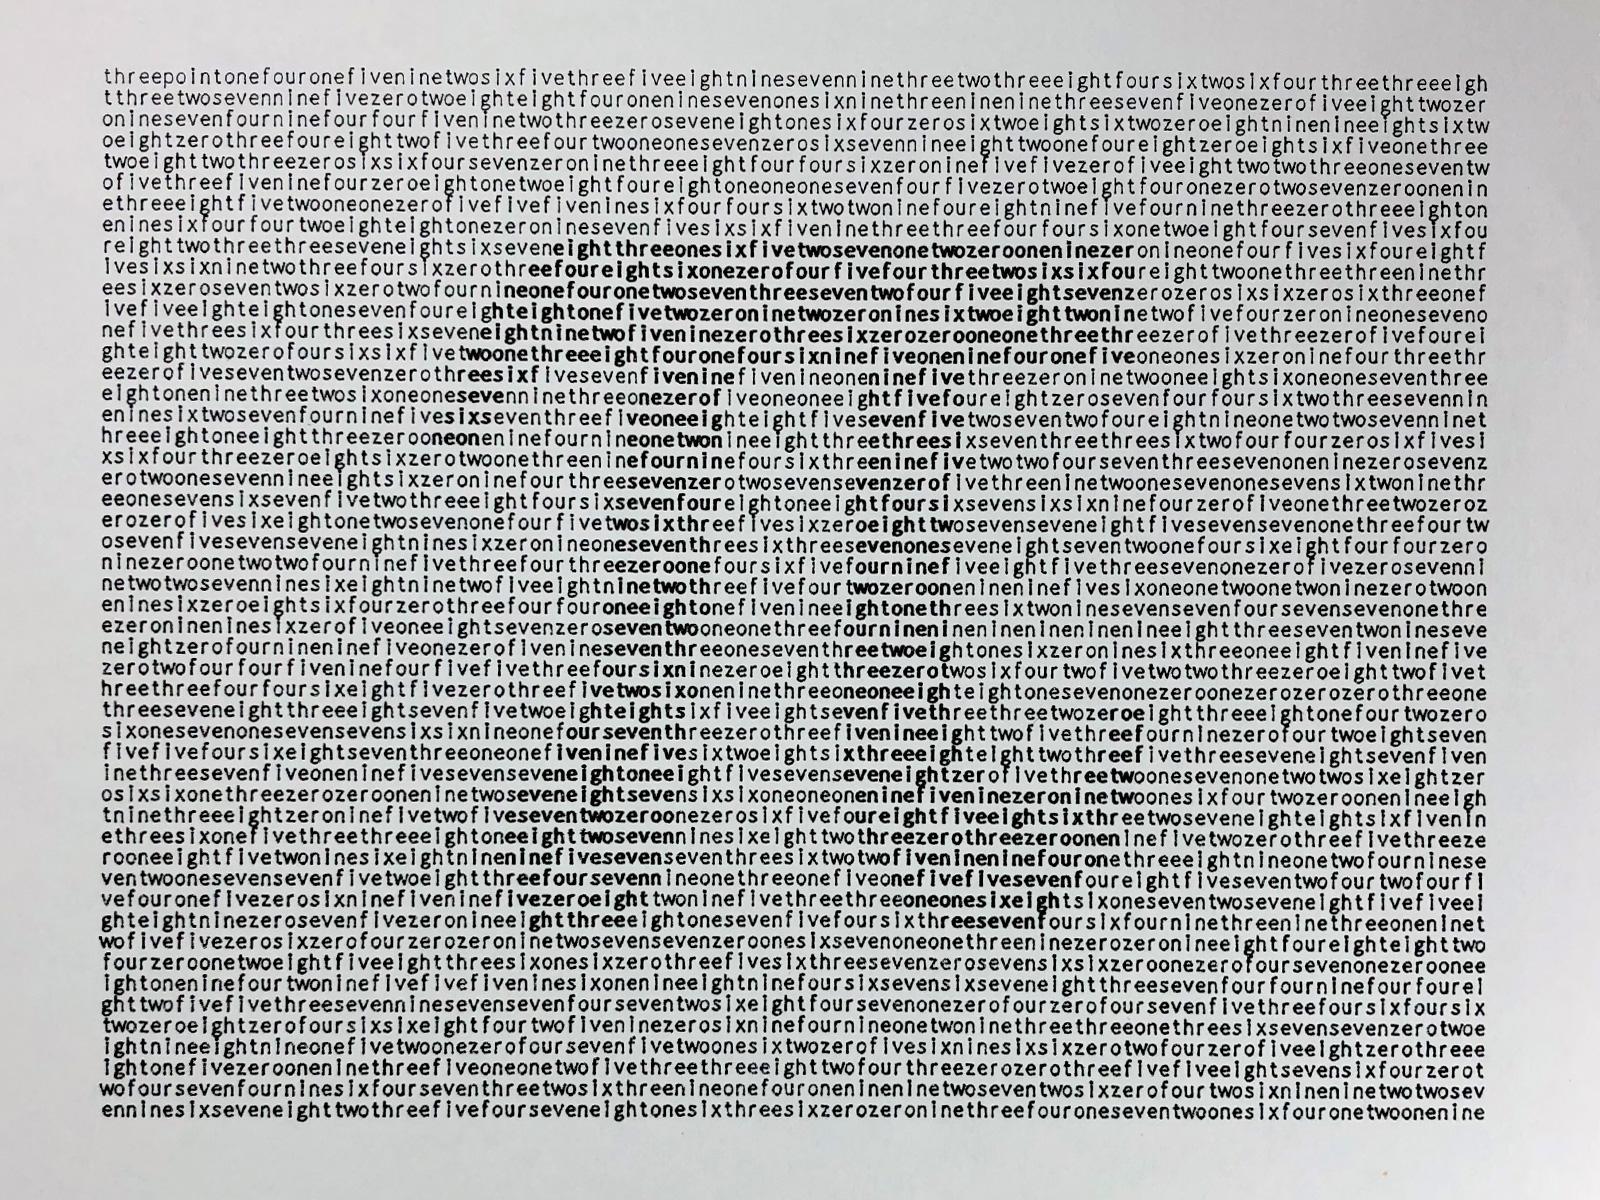 White paper filled with monospaced writing, printed without spaces in a tightly packed grid. In the center, some letters appear bolder, revealing the vague outline of the “pi” character